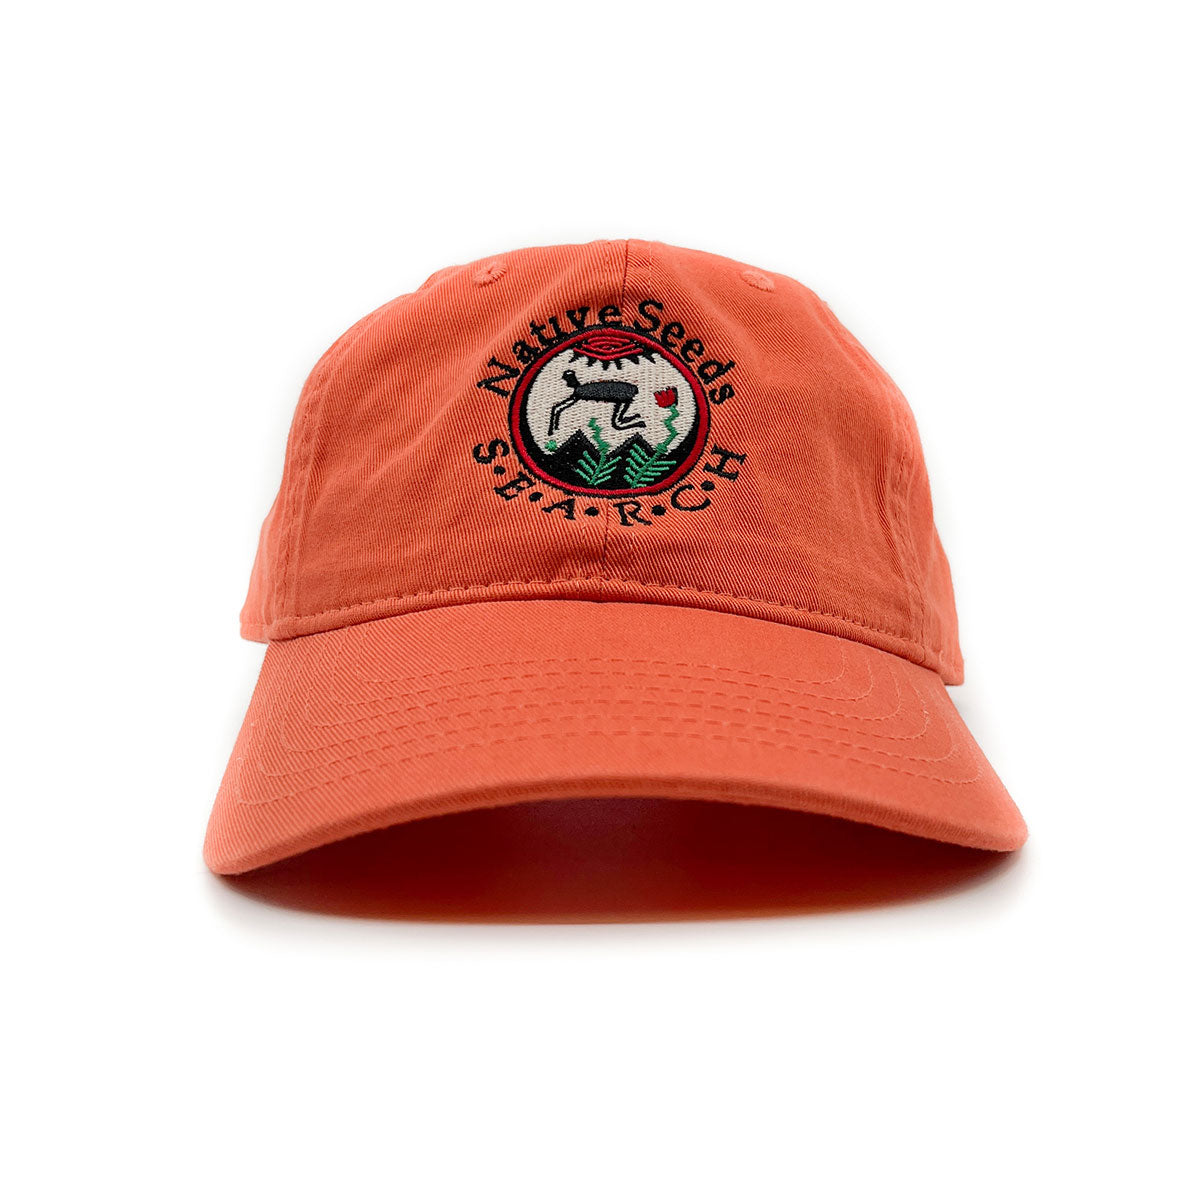 Load image into Gallery viewer, native seeds search logo baseball cap in terra cotta. 100% organic cotton cap with embroidered logo
